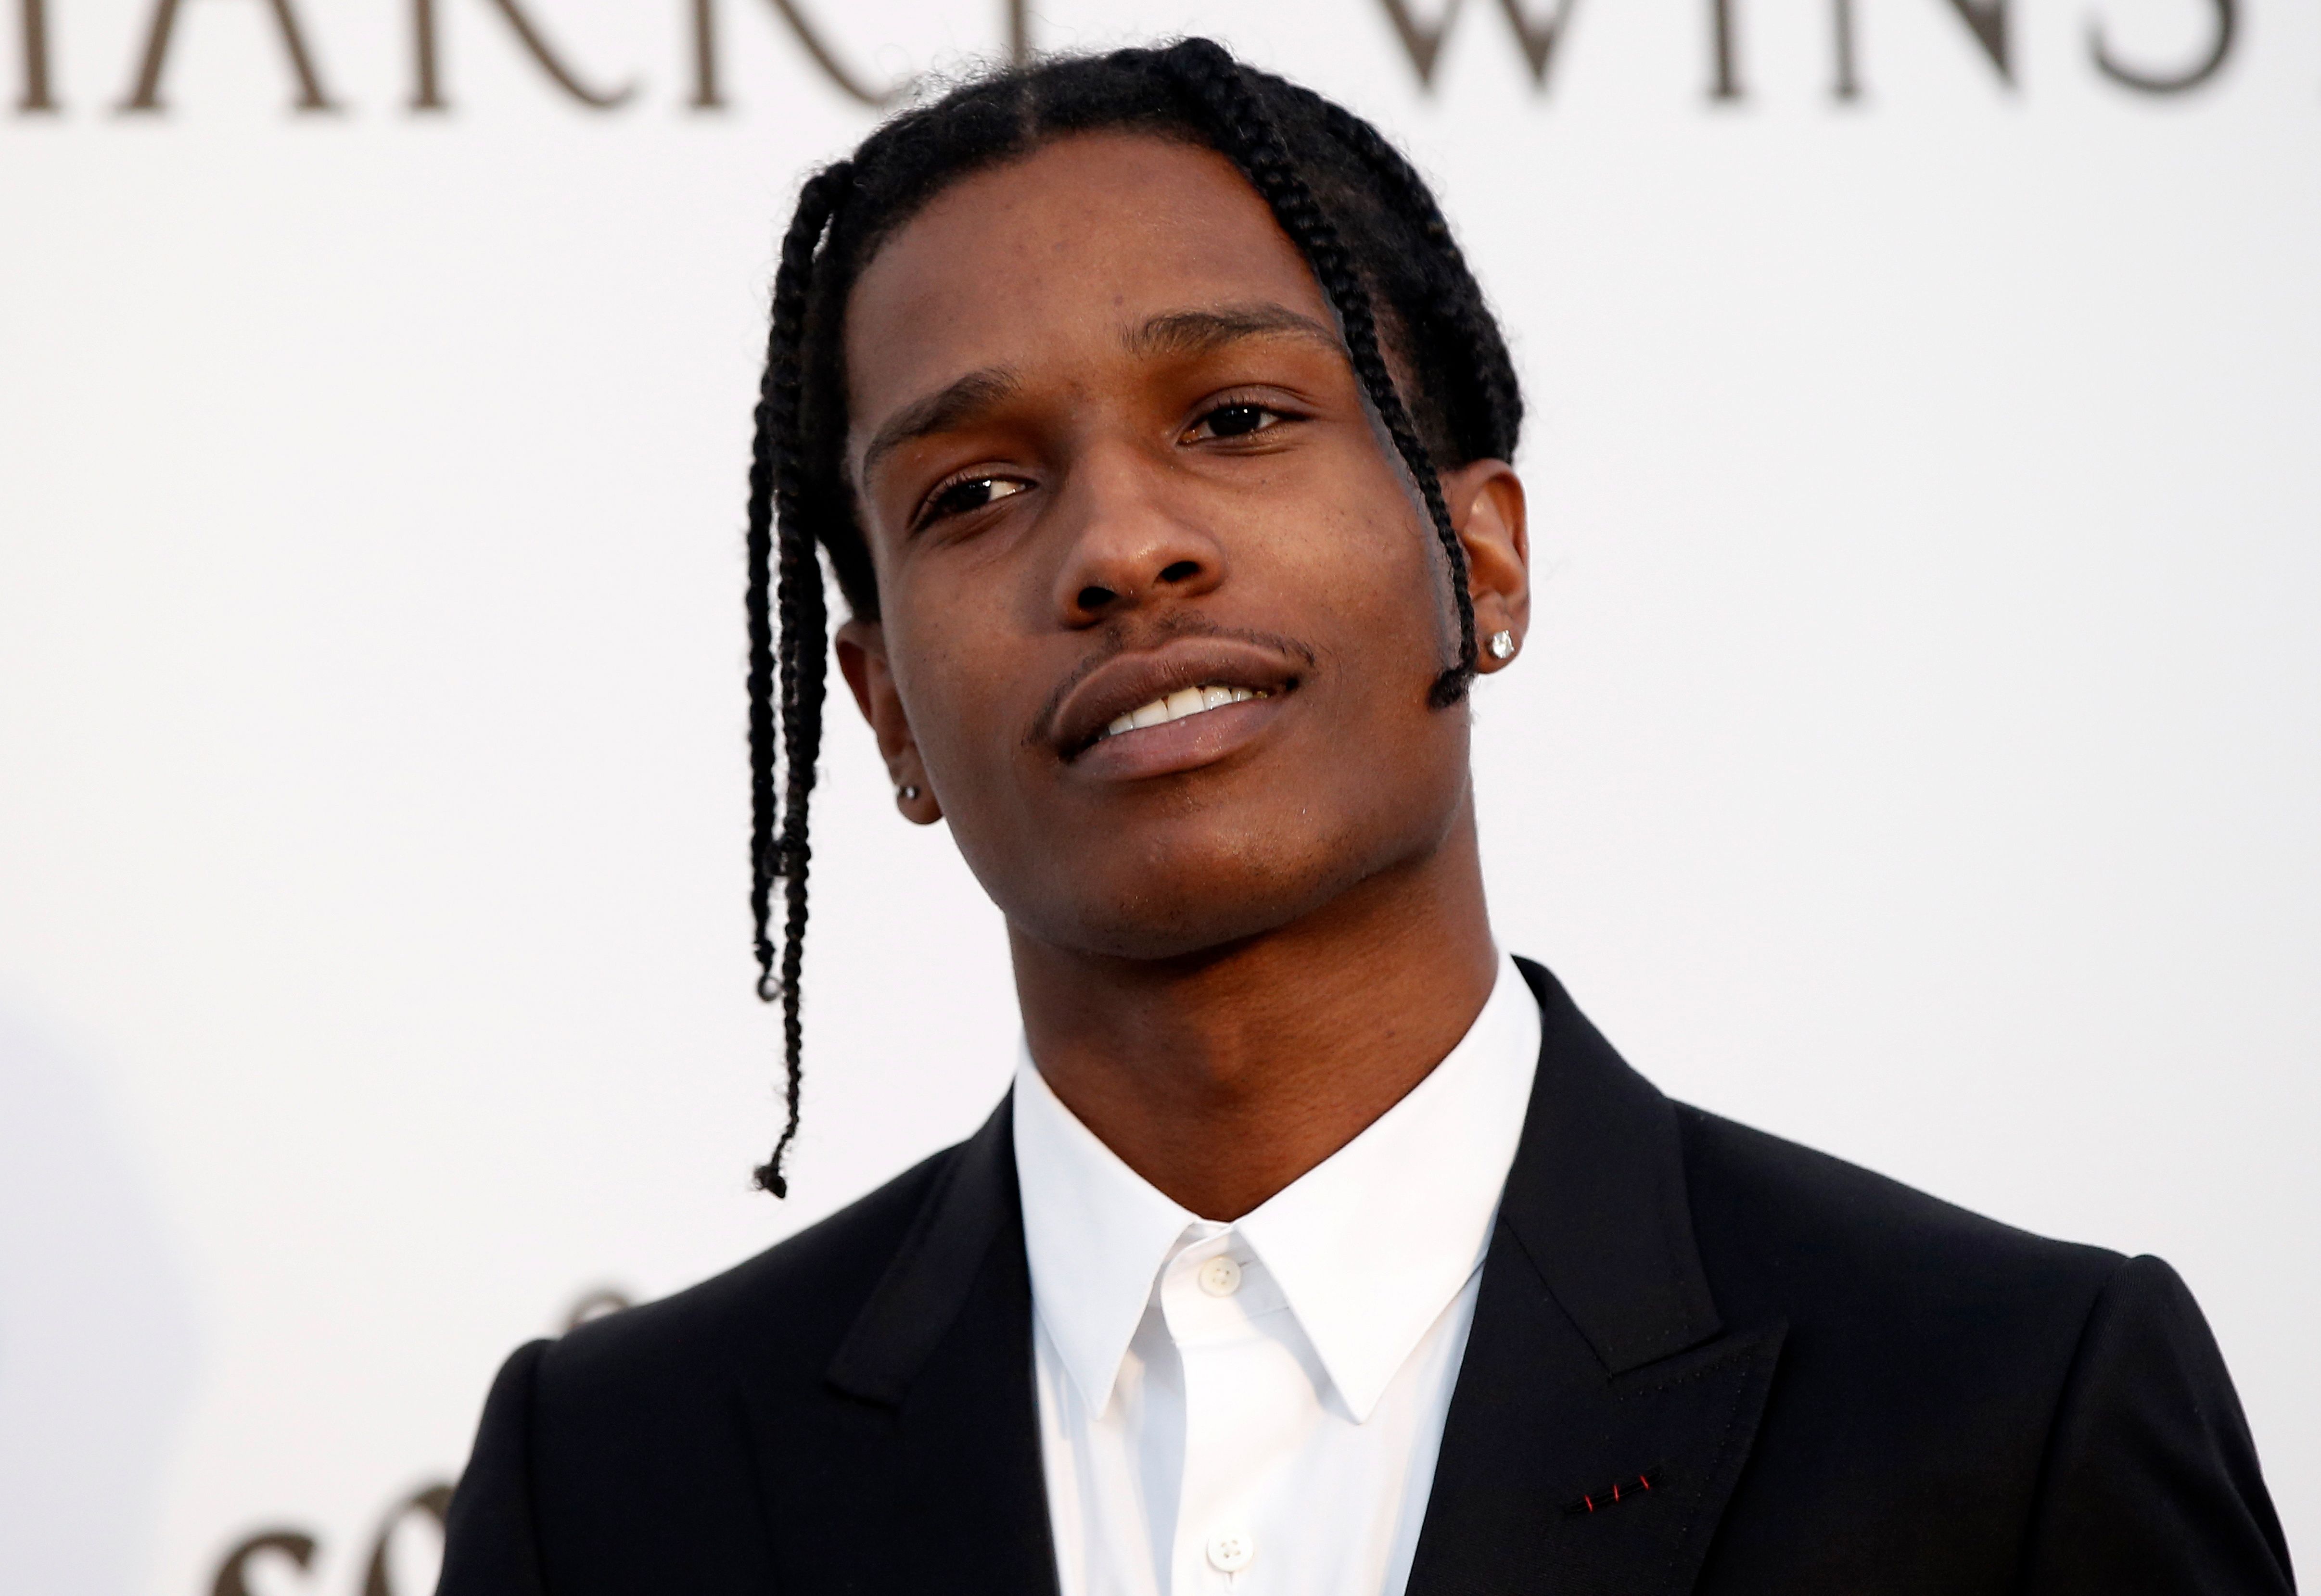 Rapper a$ap rocky reportedly arrested in Hawaii